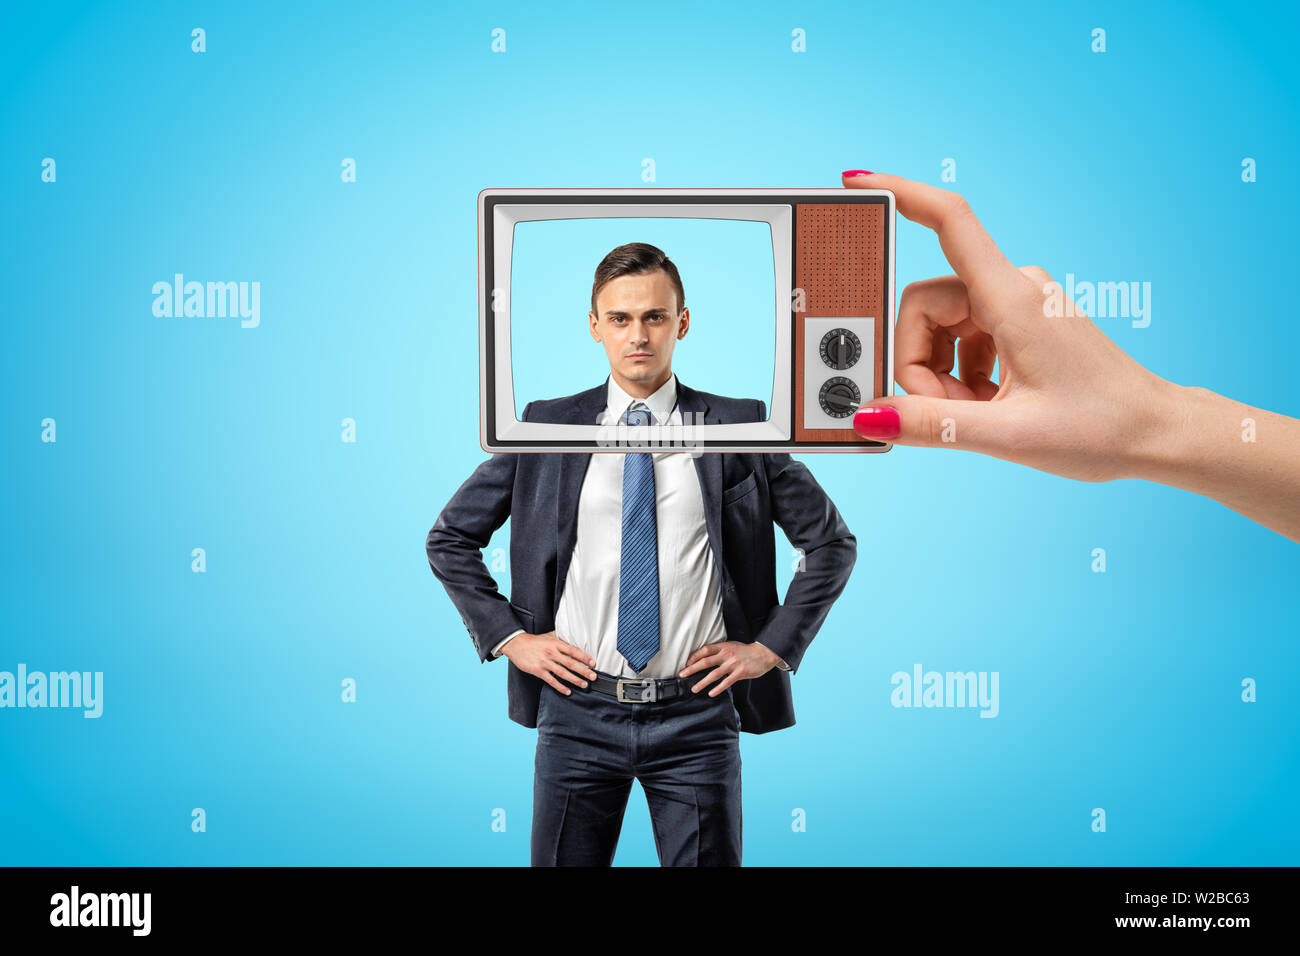 Young serious businessman standing, hands on hips, looking at camera through old TV frame with removed screen, held in woman's hand. Stock Photo